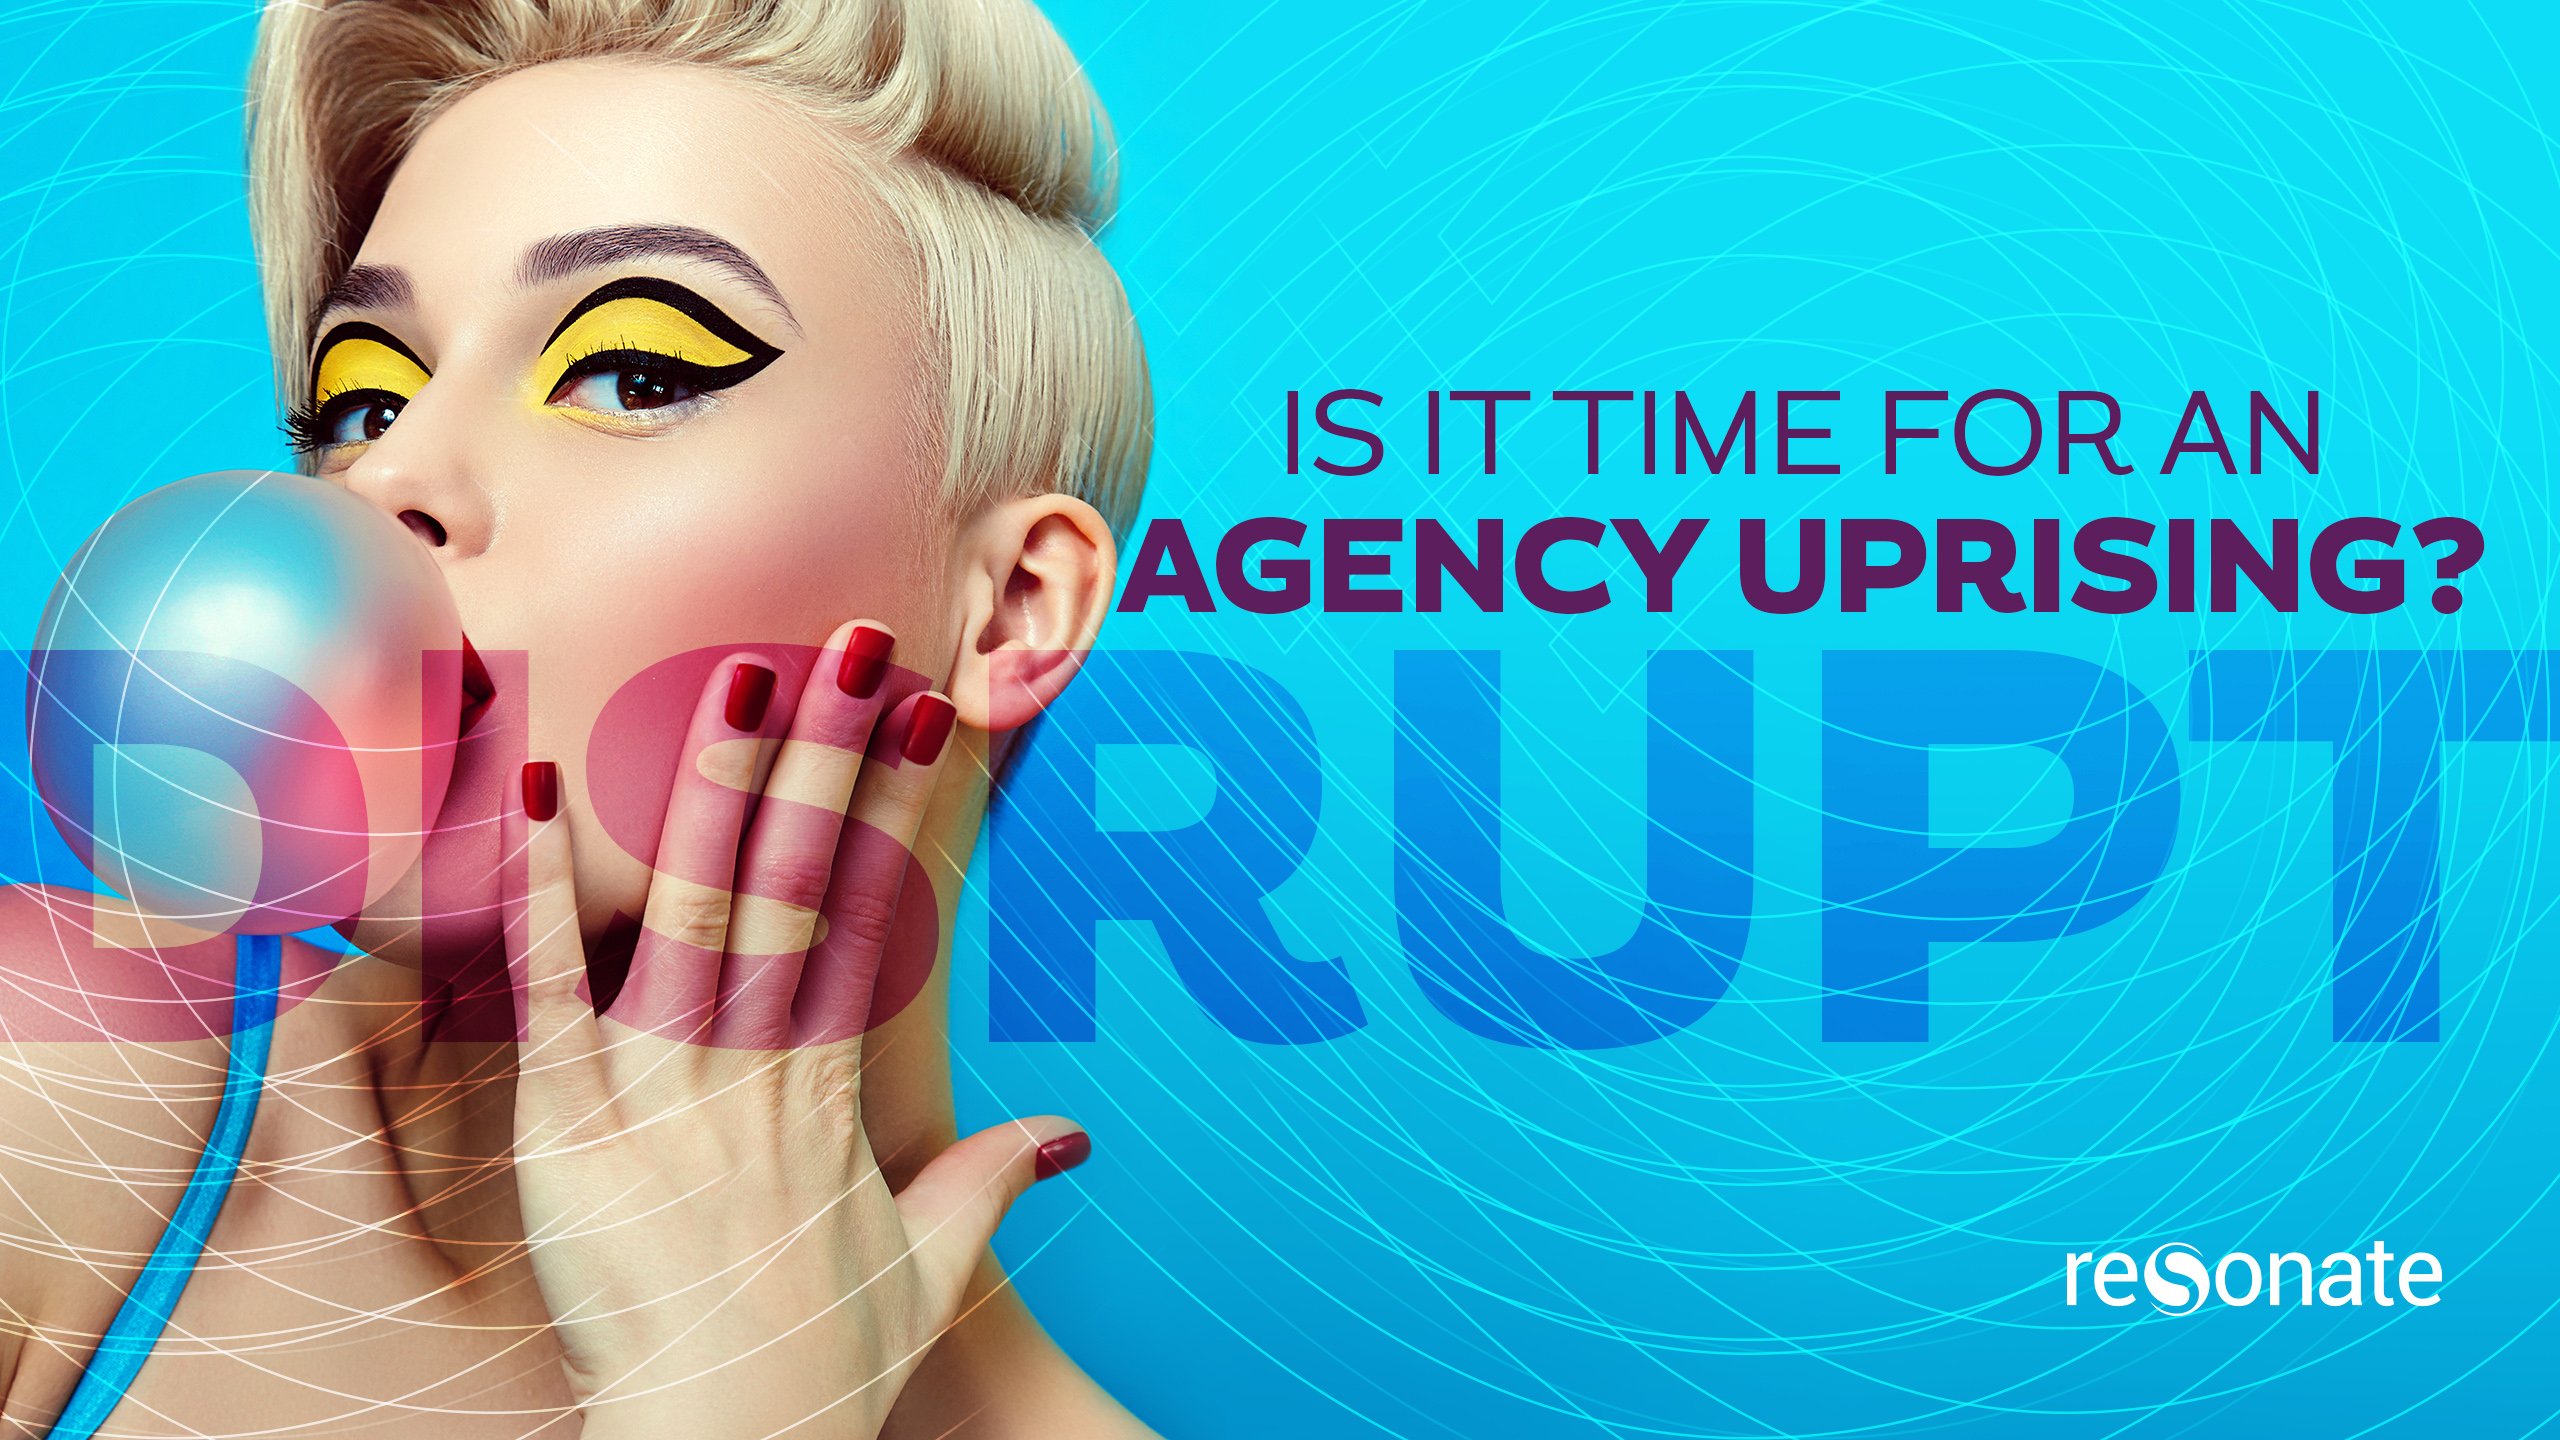 Time for Agency Uprising Image